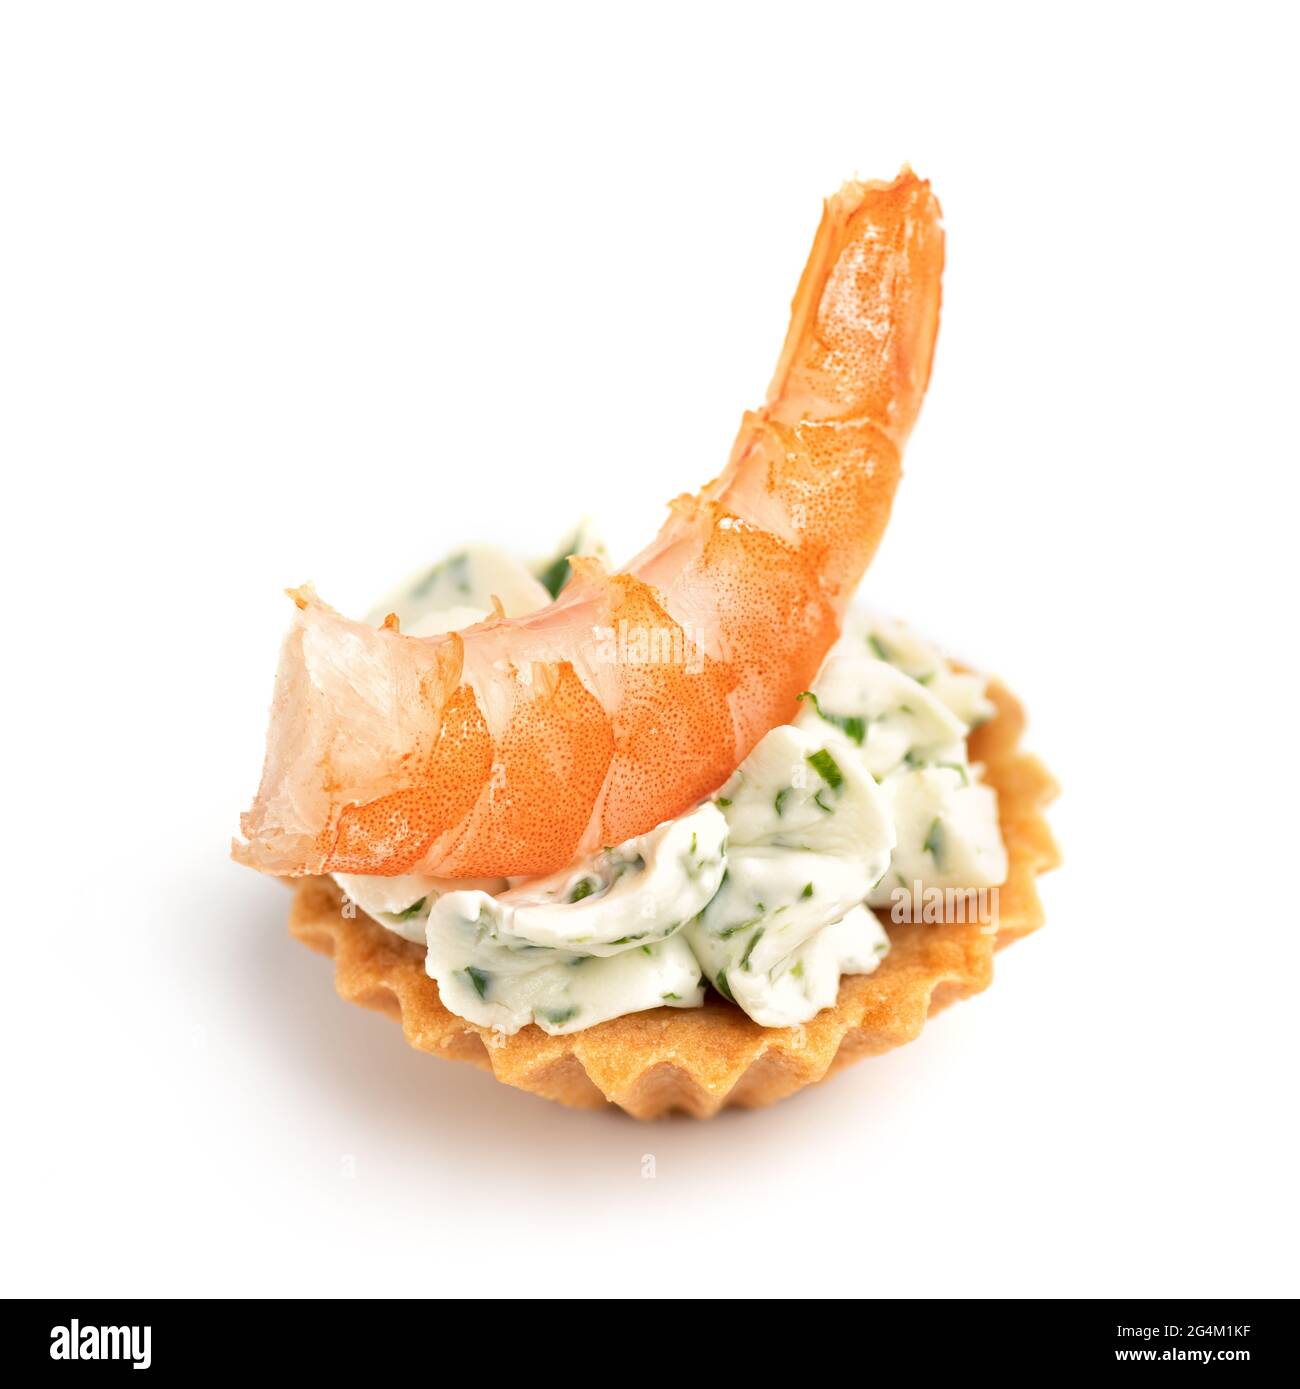 https://c8.alamy.com/comp/2G4M1KF/seafood-canape-shrimp-and-cheese-isolated-on-white-background-2G4M1KF.jpg